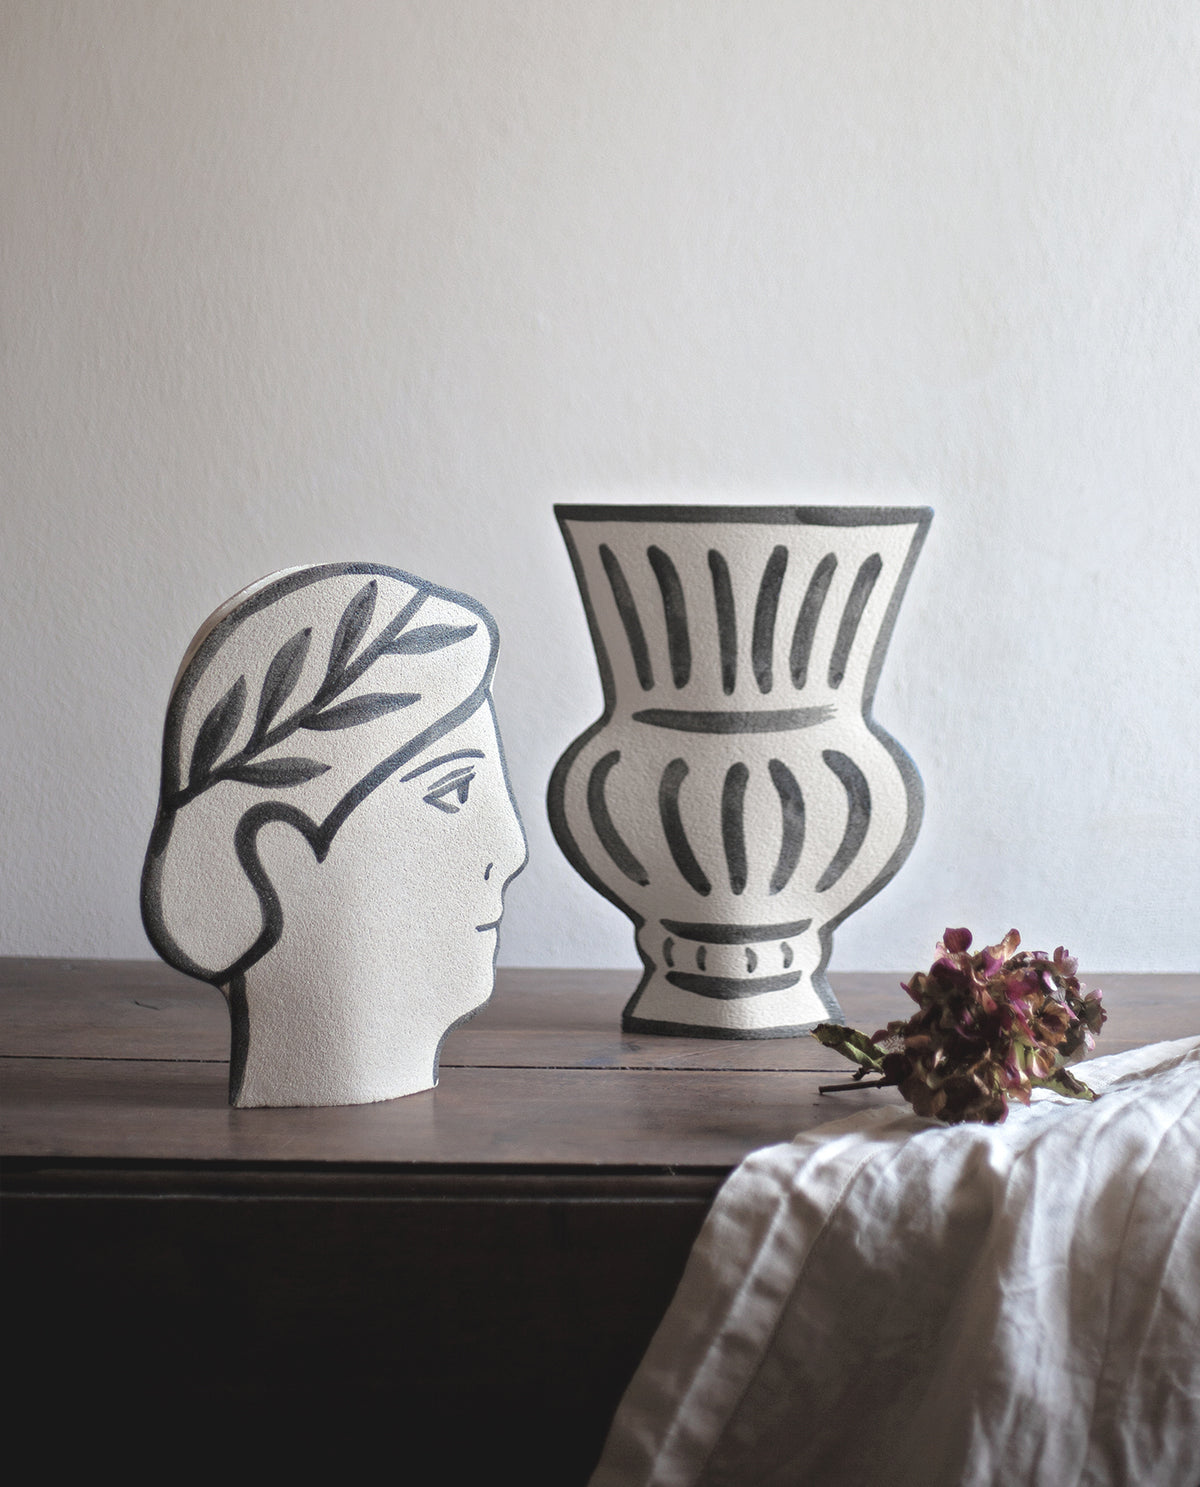 Hand-painted greek vase by INI CERAMIQUE with face patterns and a textured finish